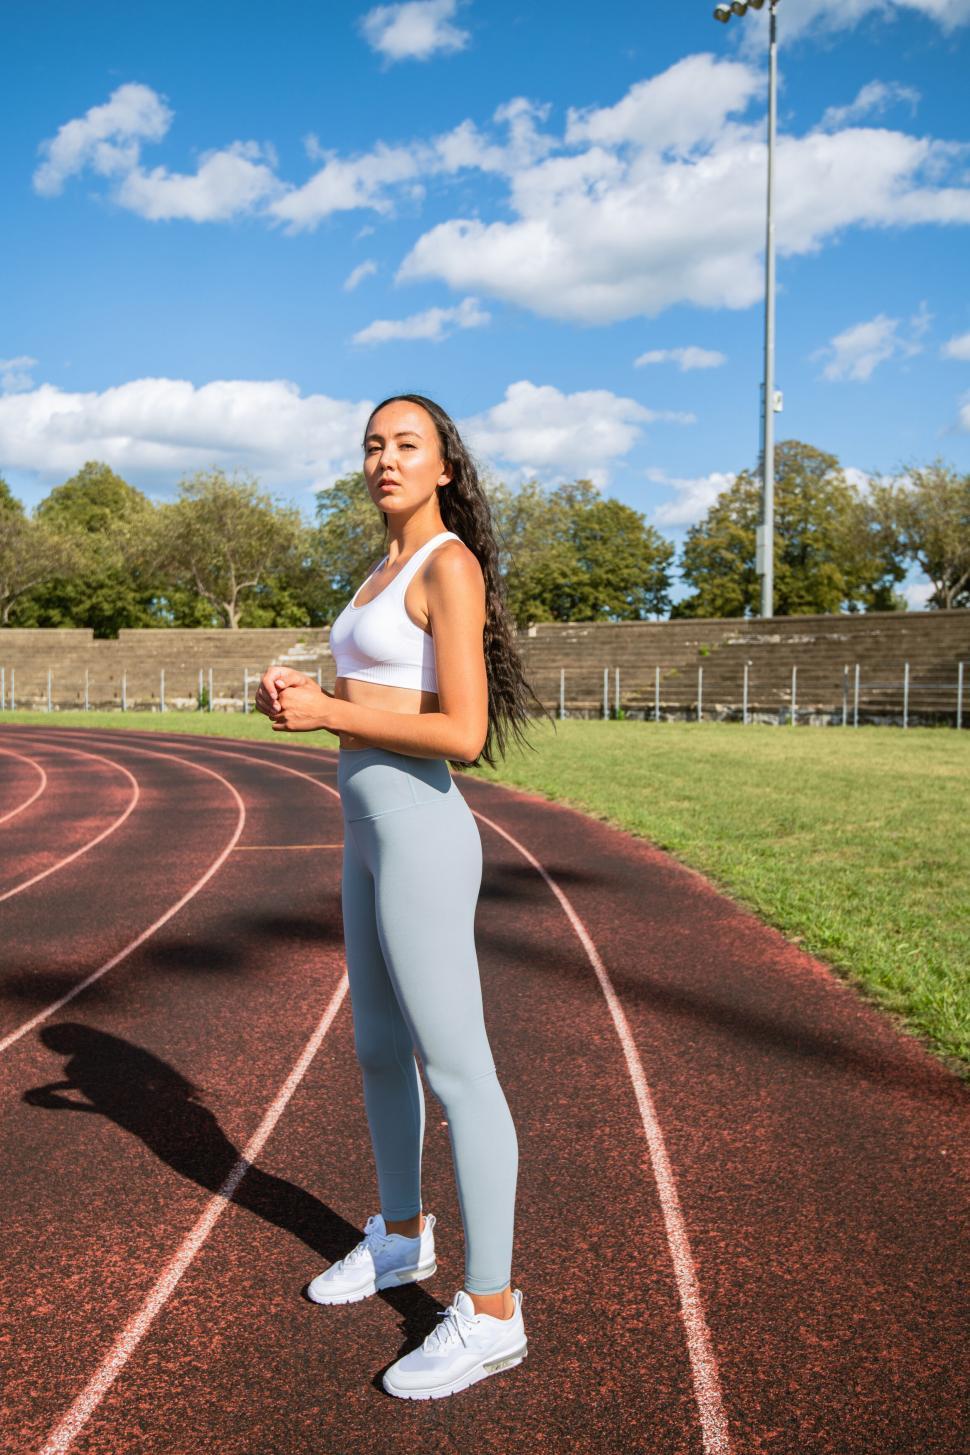 Free Image of Athletic woman at the starting line on a track 